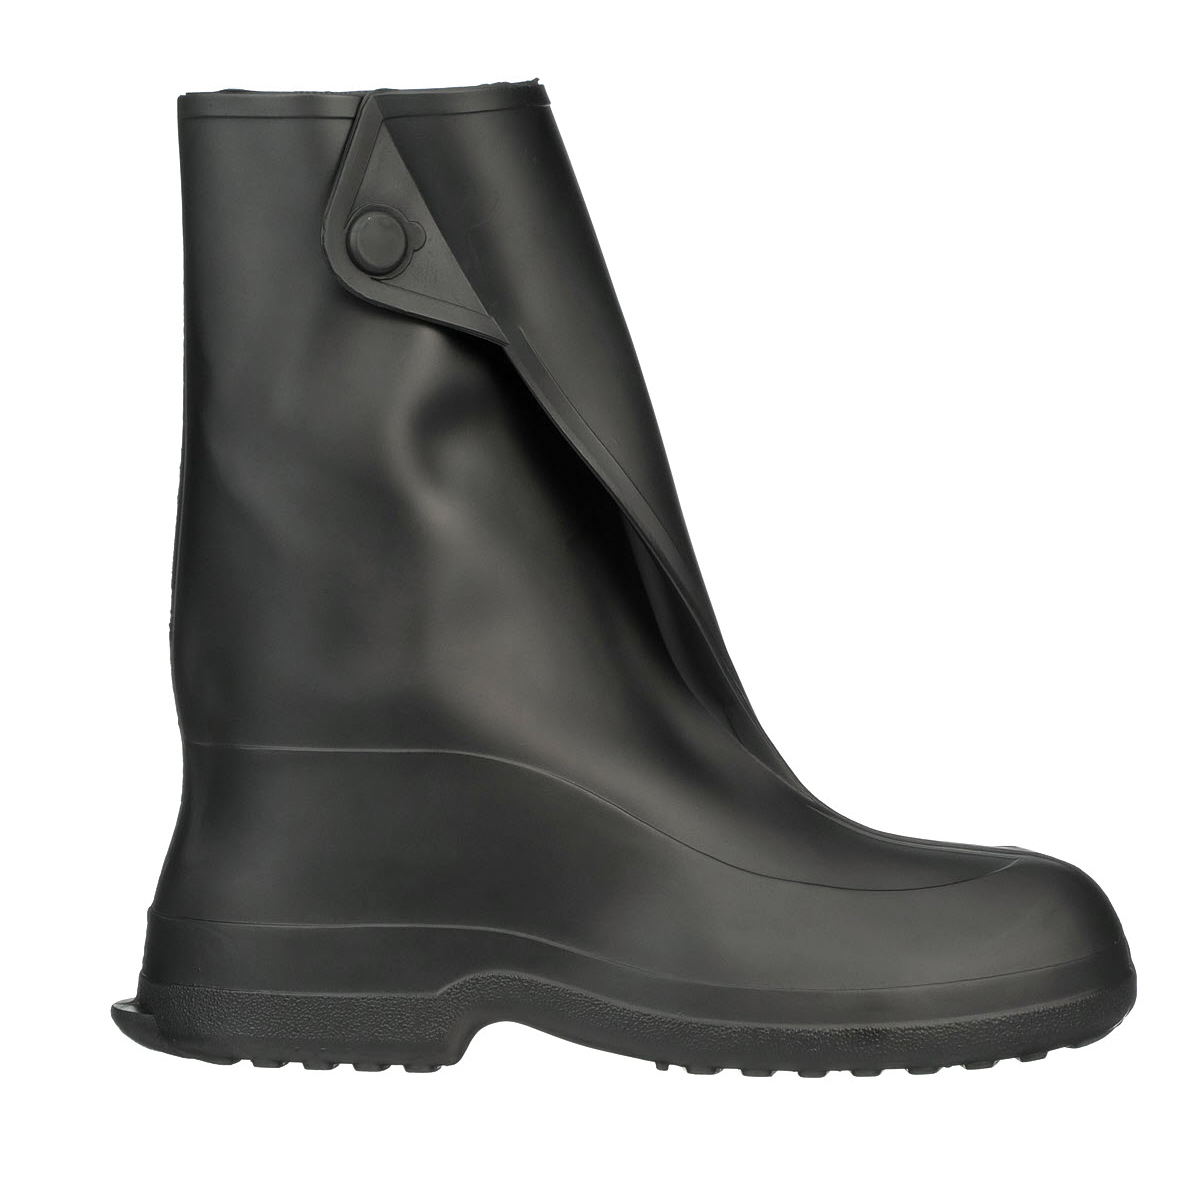 Tingley Workbrutes® 35121.LG Waterproof Overboots, Unisex, SZ 9.5 to 11 Men's, SZ 11.5 to 13 Women's Fits Shoe, Soft Toe, Black, Cleated Sole, Button Tab Closure, PVC Upper & Midsole, PVC Outsole